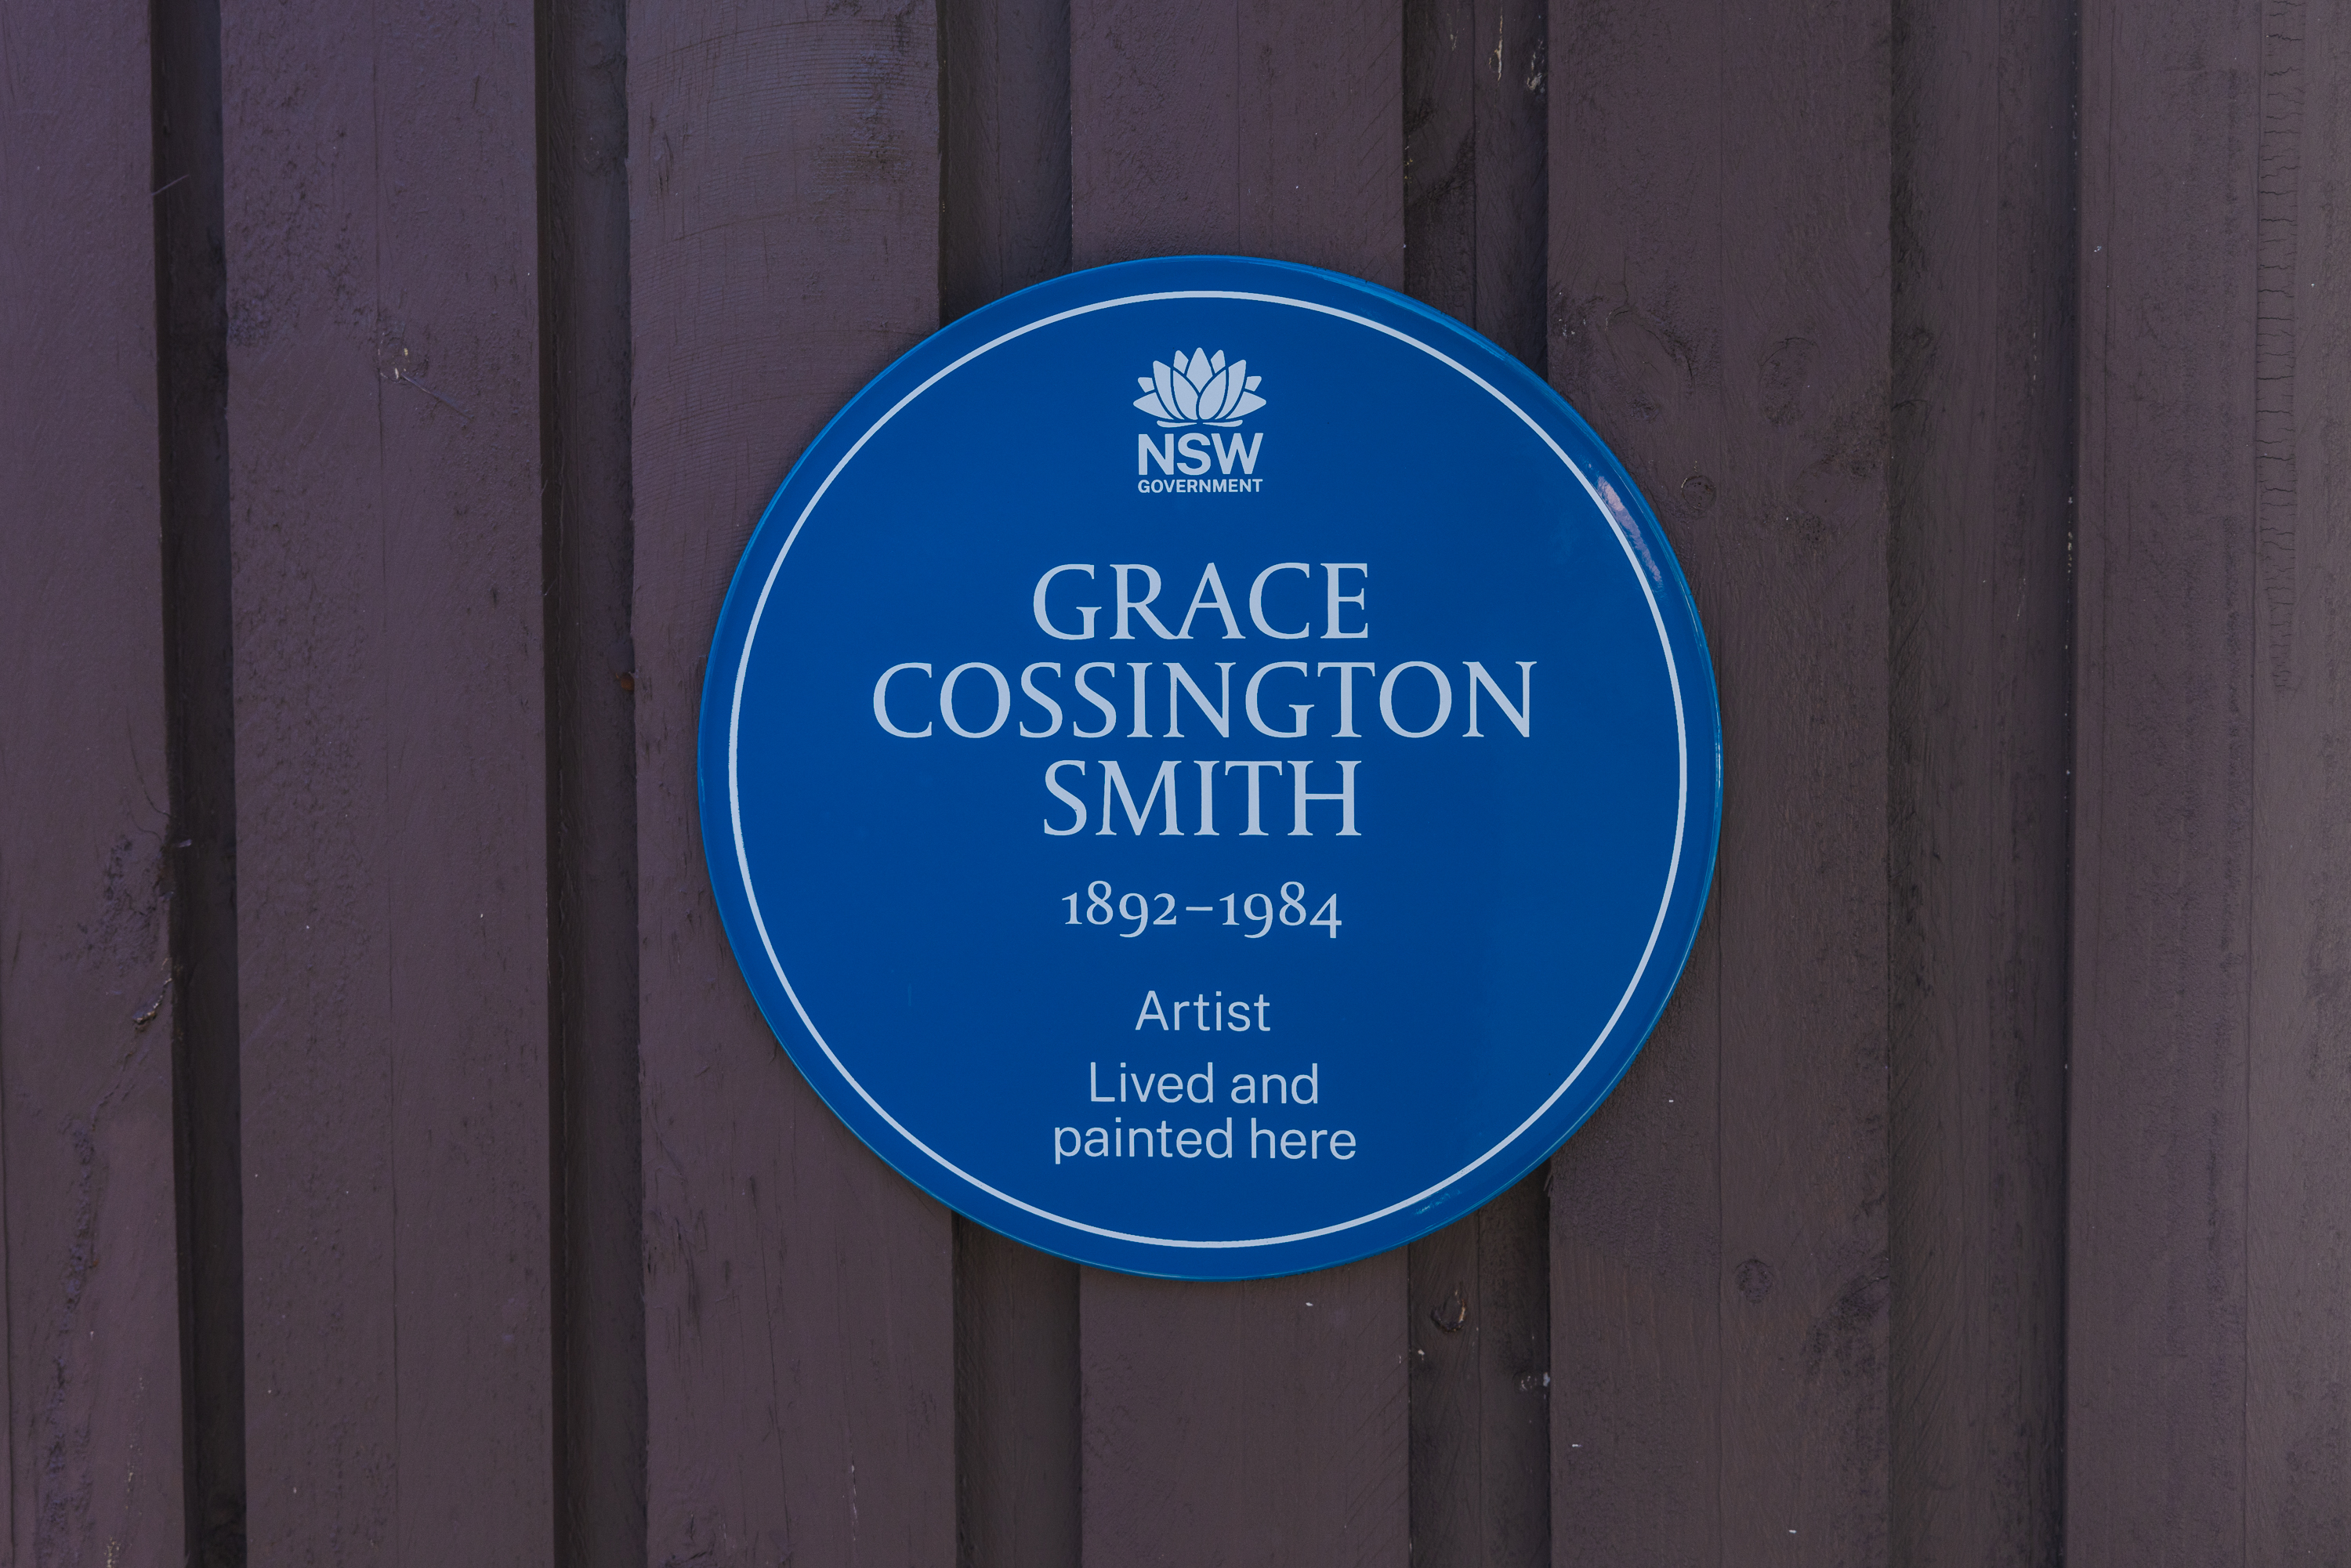 Image 5 of 6 - A photo of a blue plaque for Grace Cossington Smith